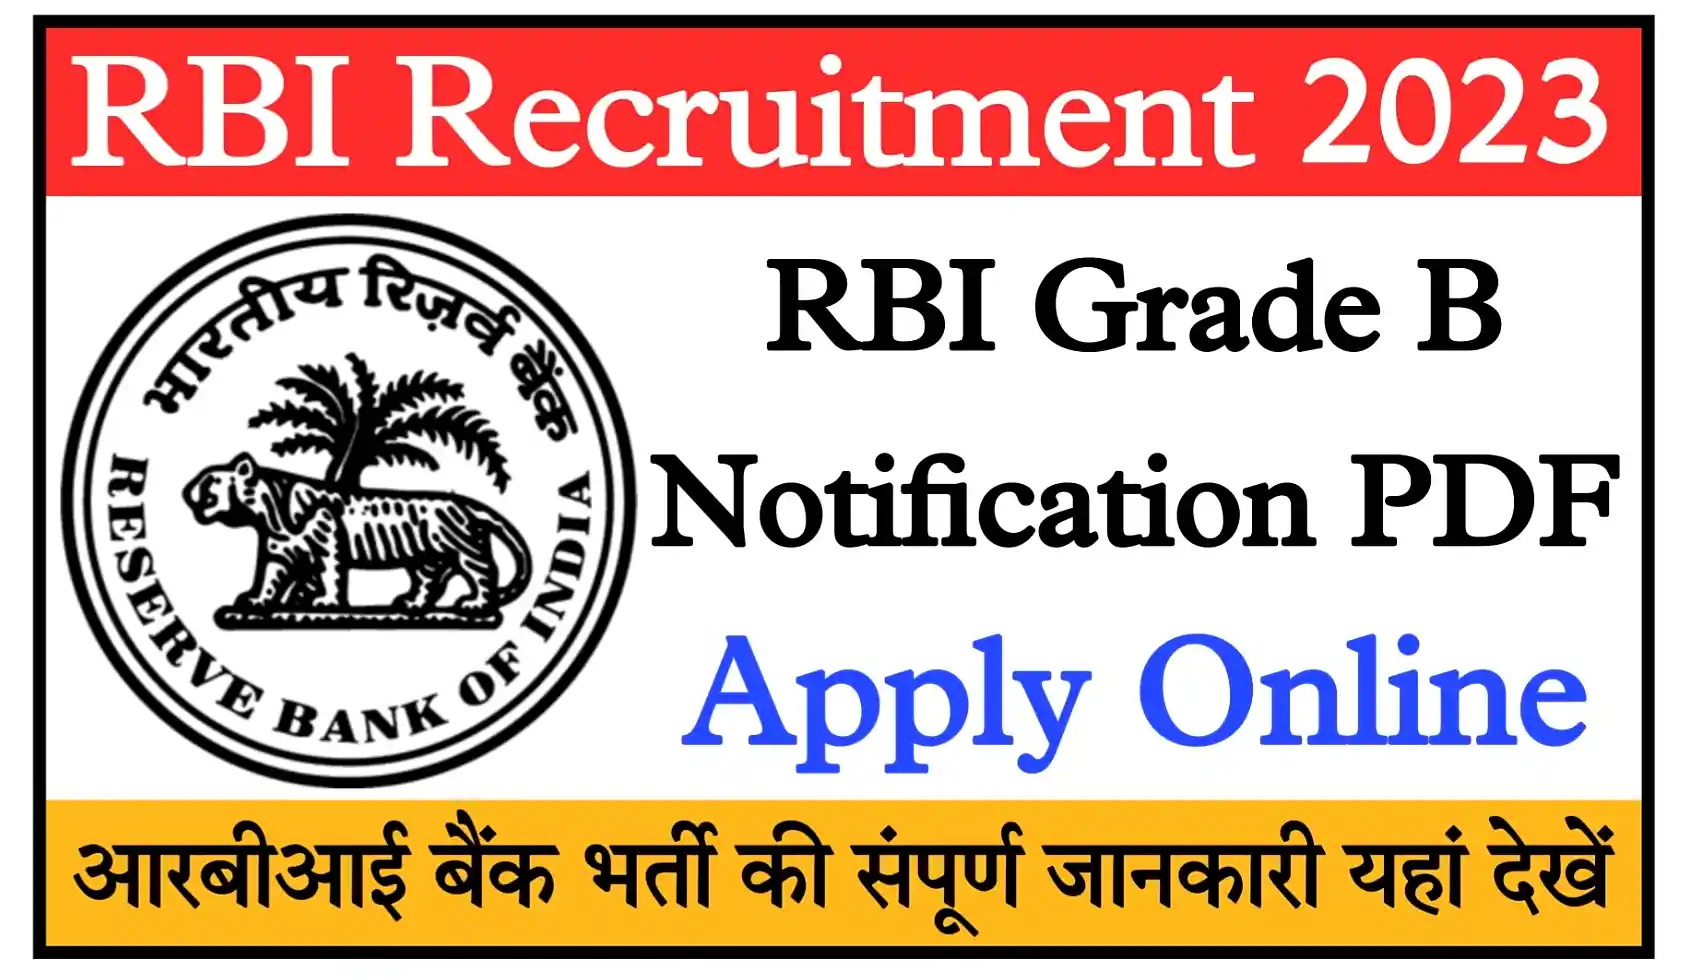 RBI Grade B Recruitment 2023 Apply Online For 291 Posts, Exam Date, Syllabus Check All Details